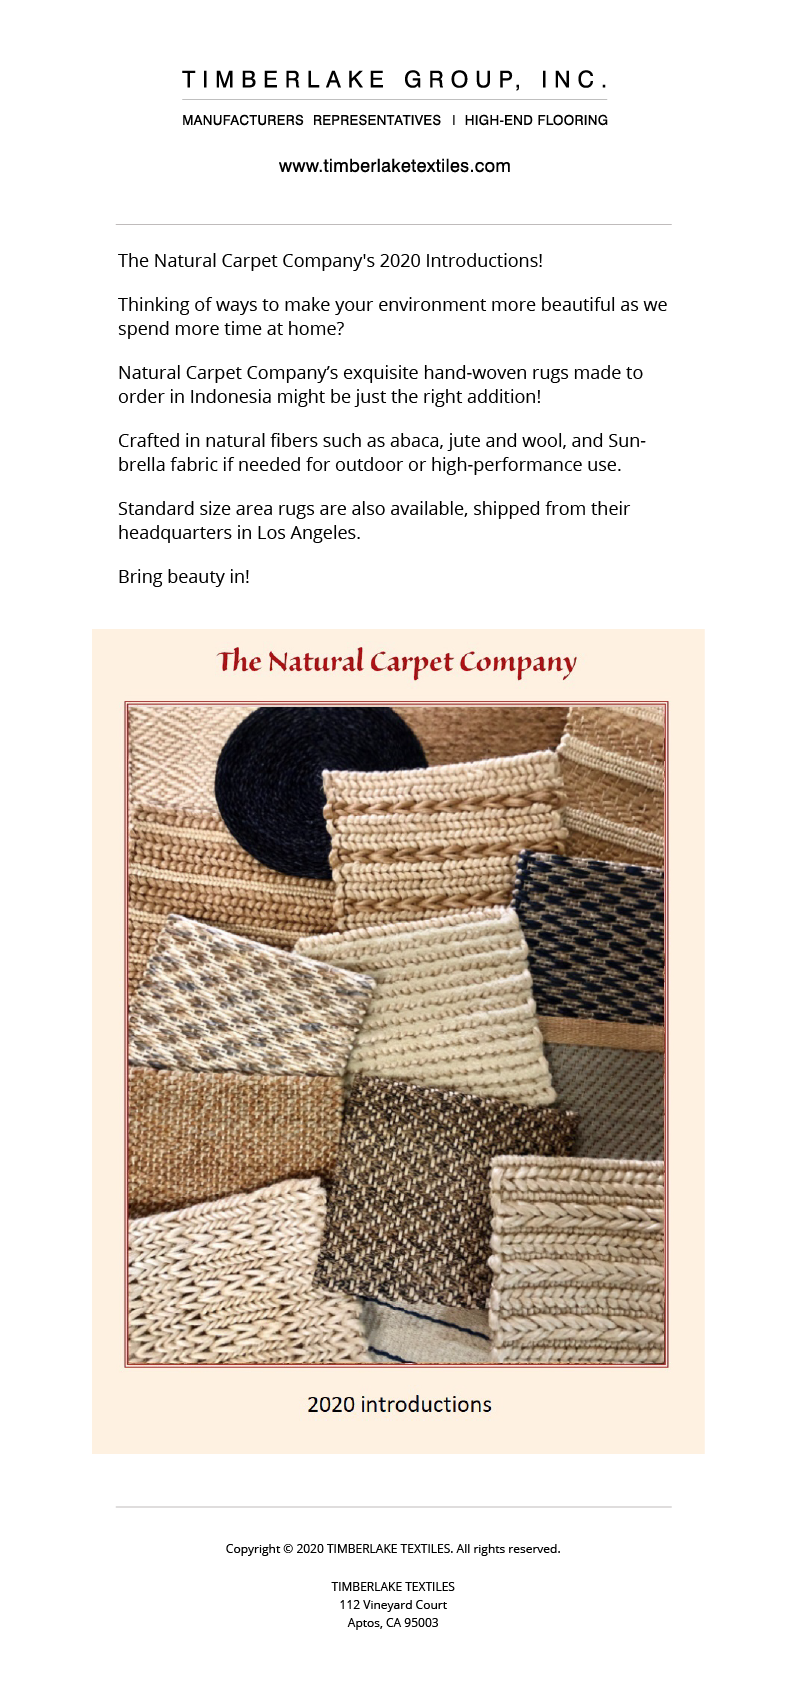 The Natural Carpet Company | 2020 Introductions